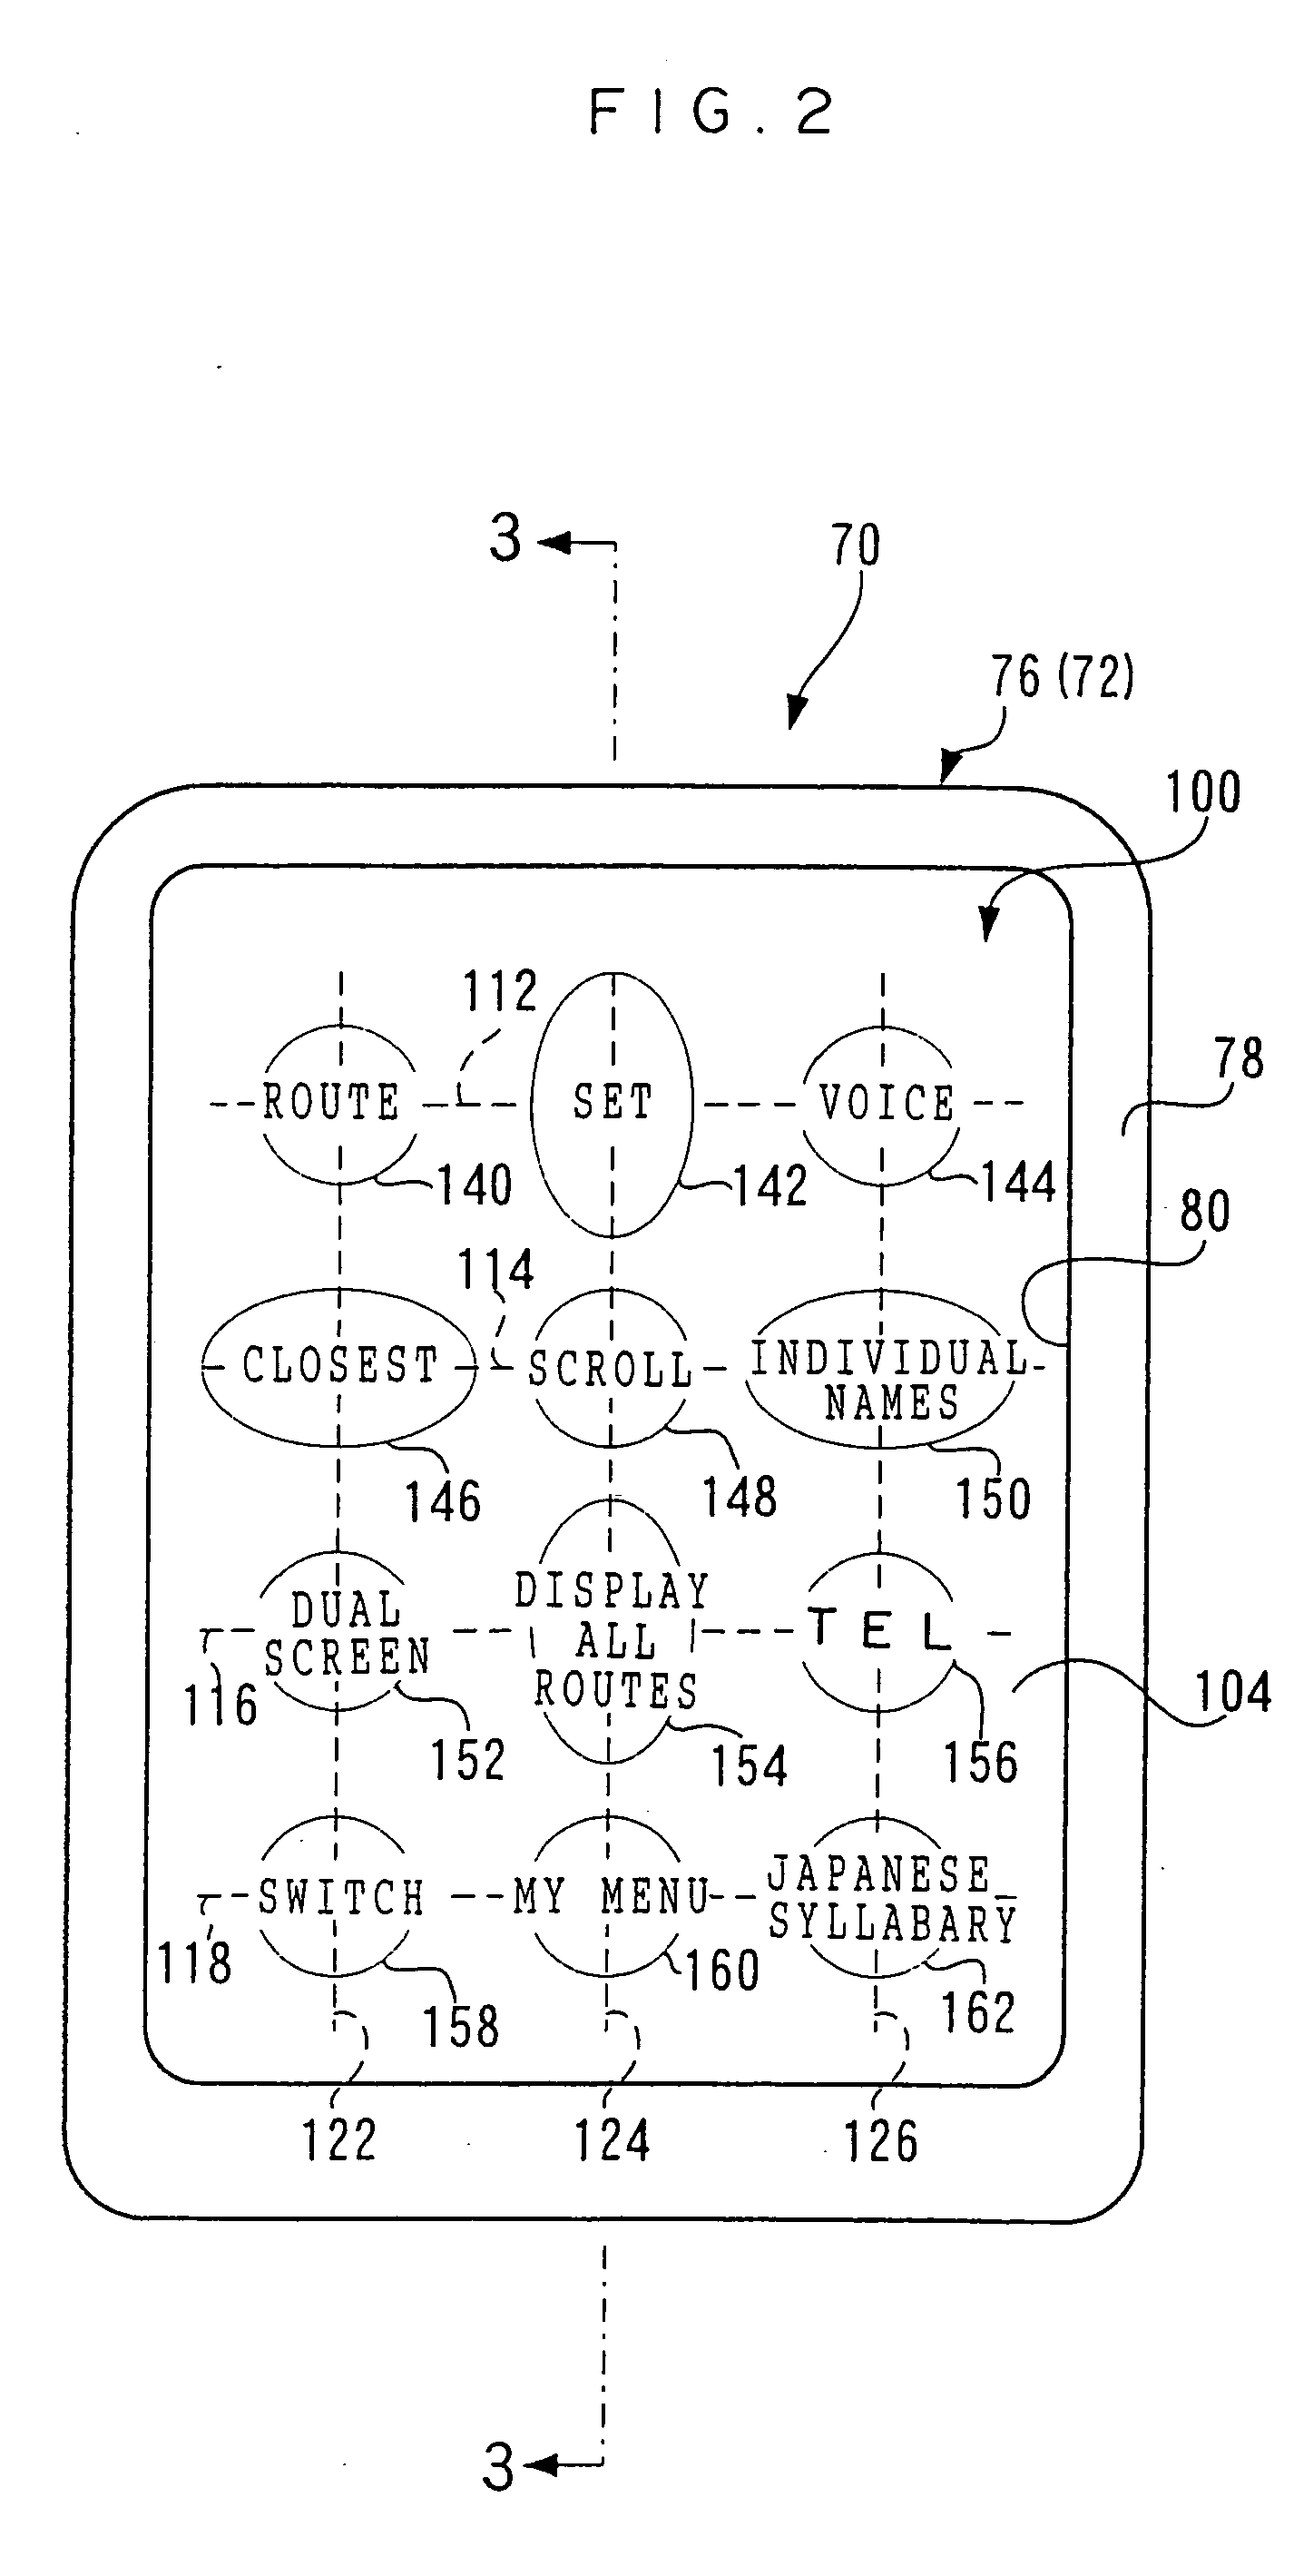 Car-mounted device control system